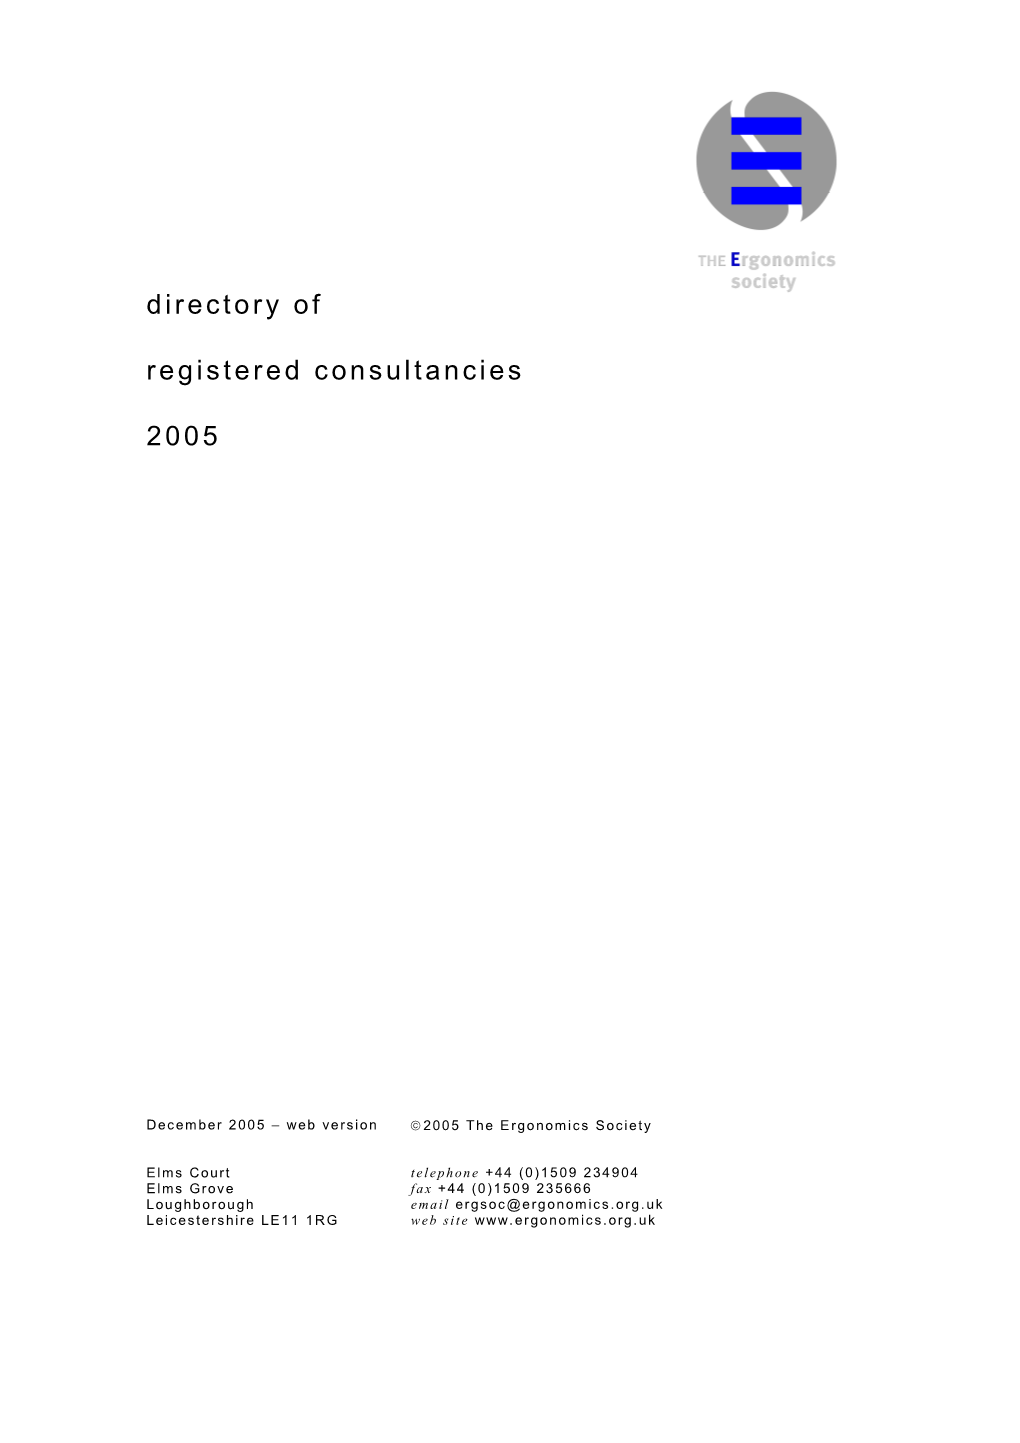 Directory of Registered Consultancies 2005